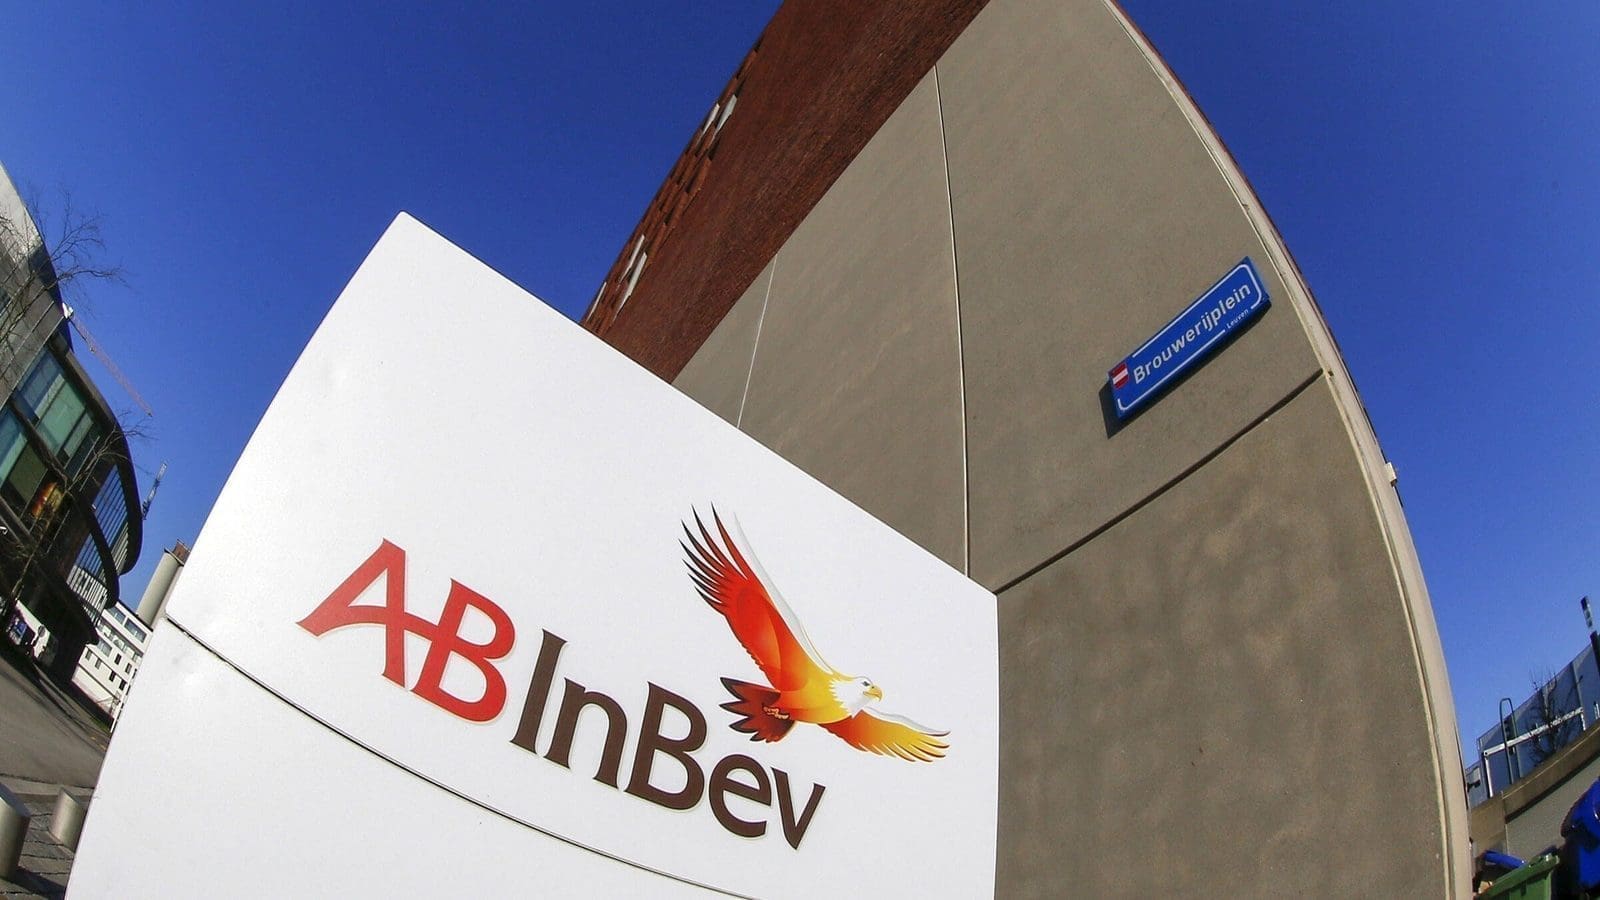 AB InBev, Molson Coors full year results eclipse pandemic levels driven by recovering beer demand 